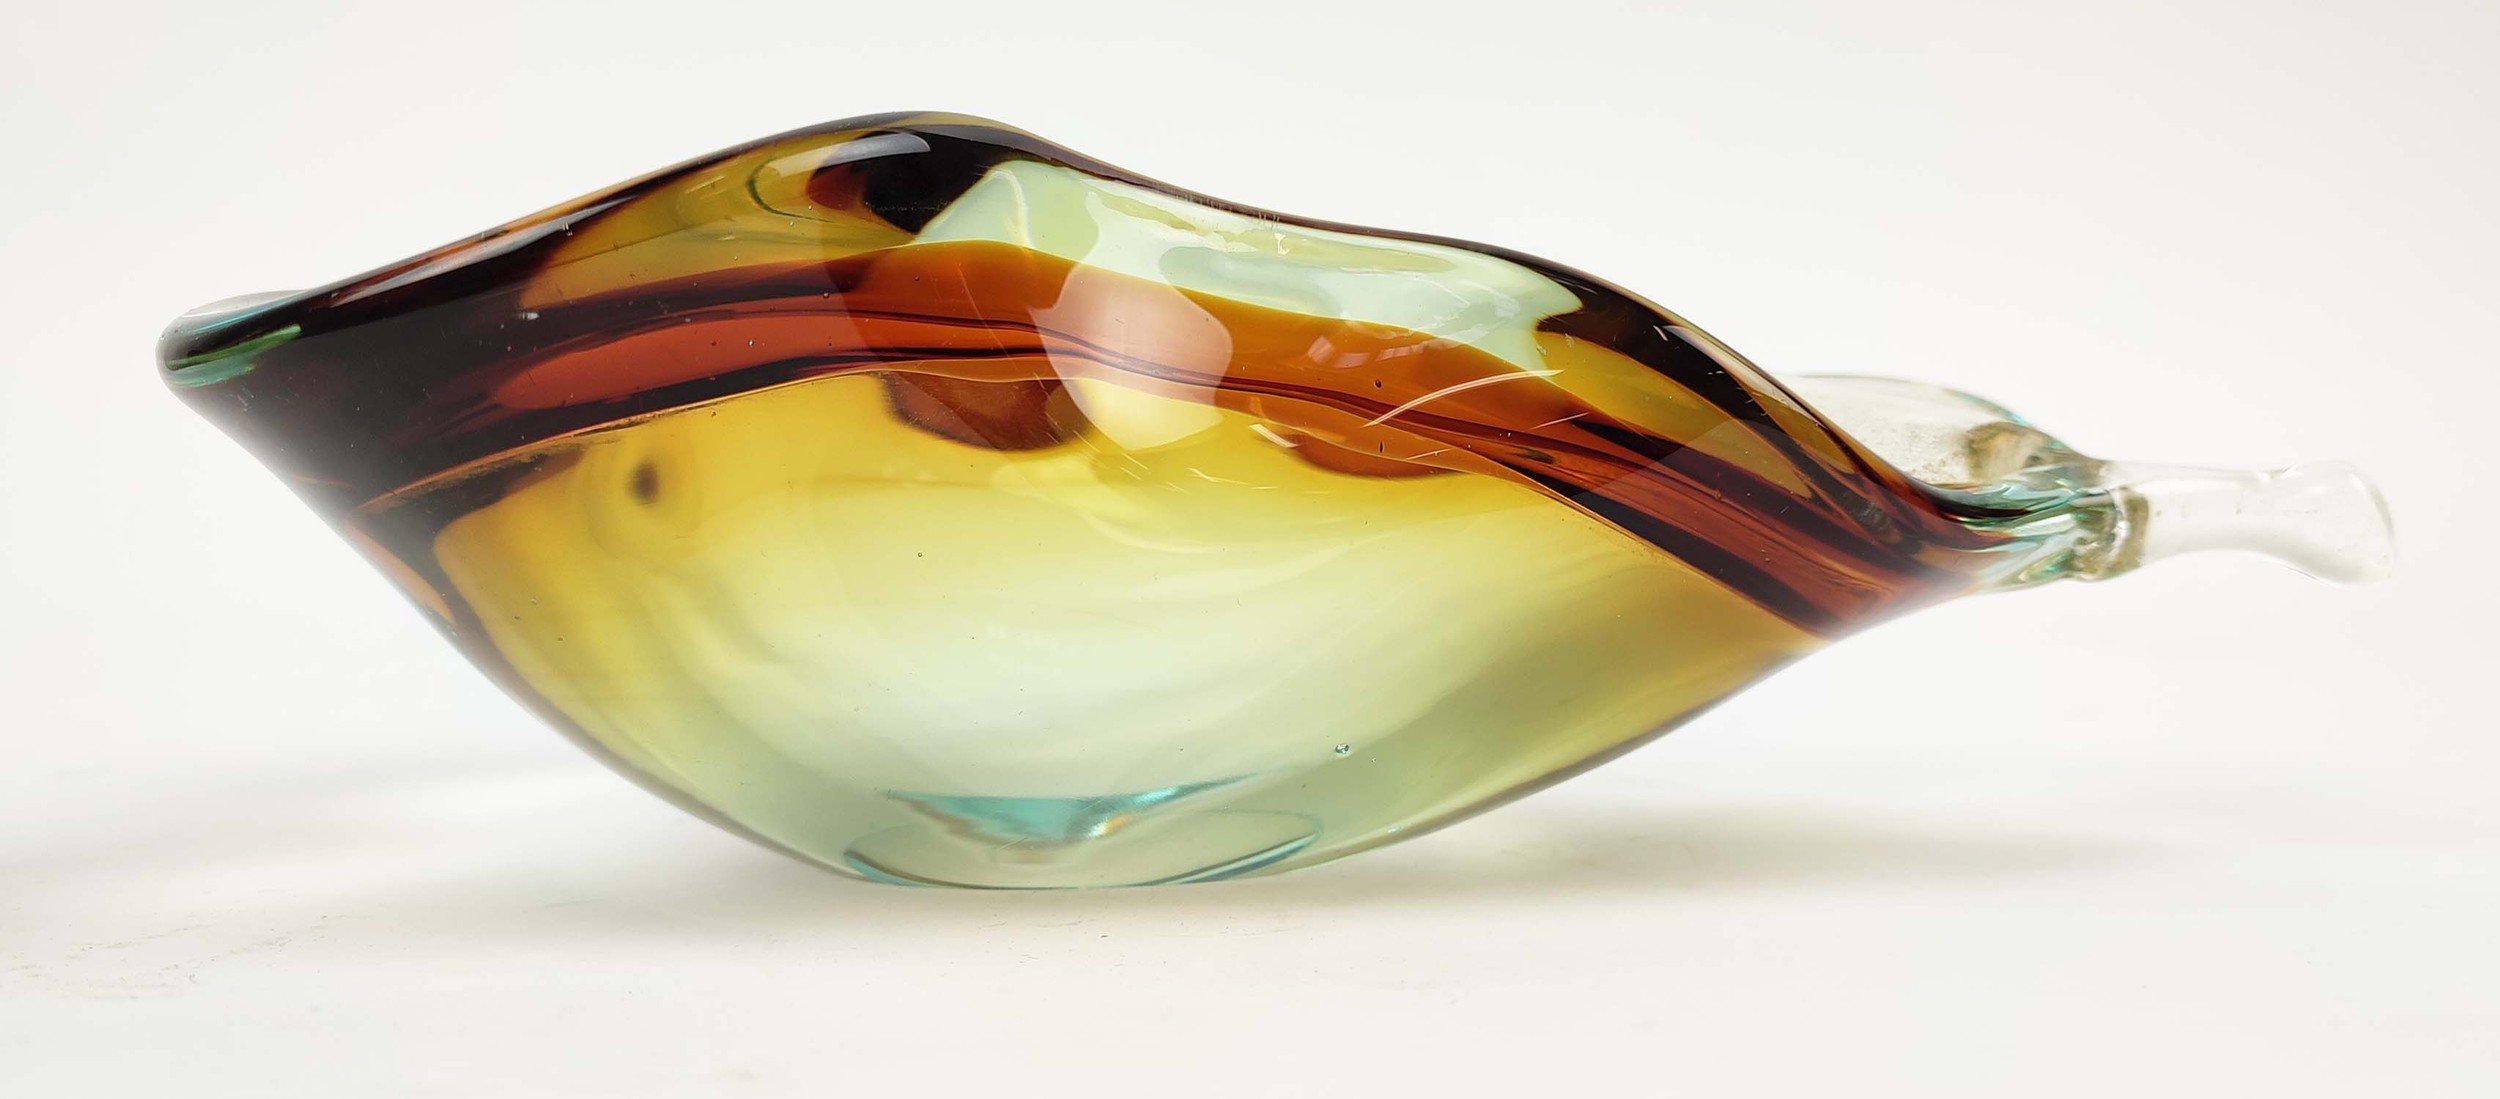 A MURANO GLASS BOWL, in the form of a pear, in amber and teal colourway, polished base, probably - Image 2 of 5